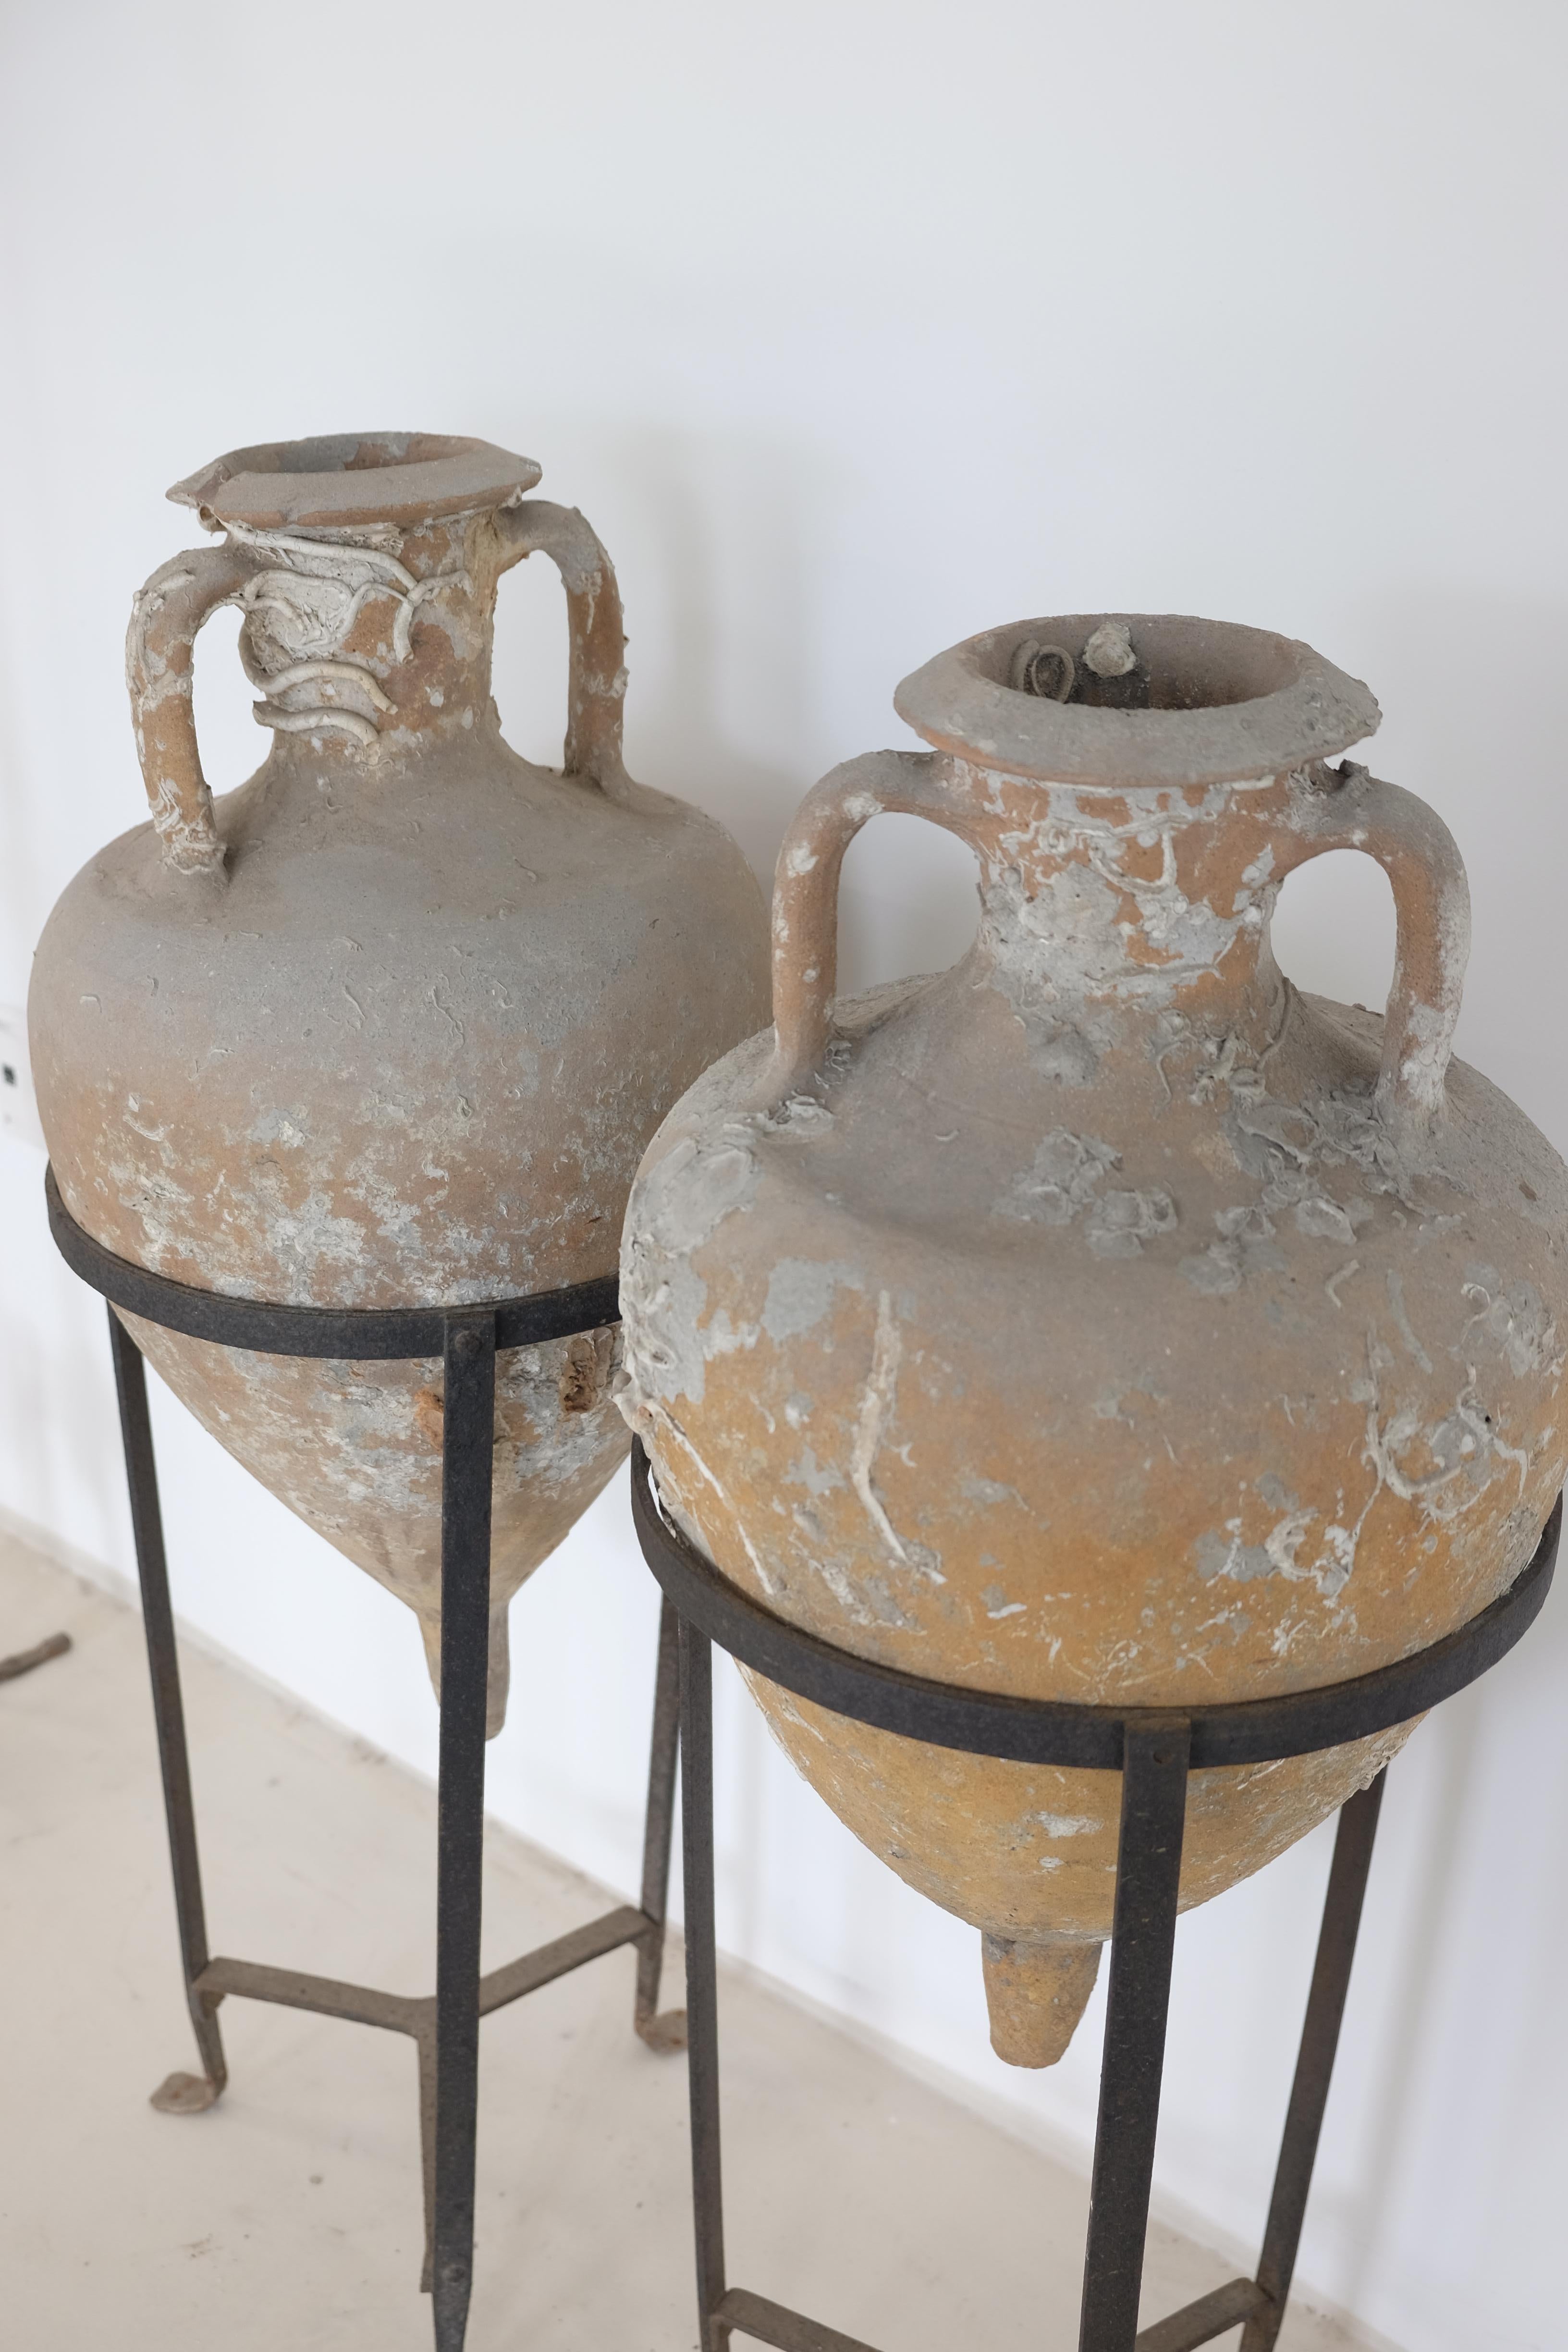 Classical Roman Pair of Sea Salvaged Roman Amphorae with 19th Century Wrought Iron Stands